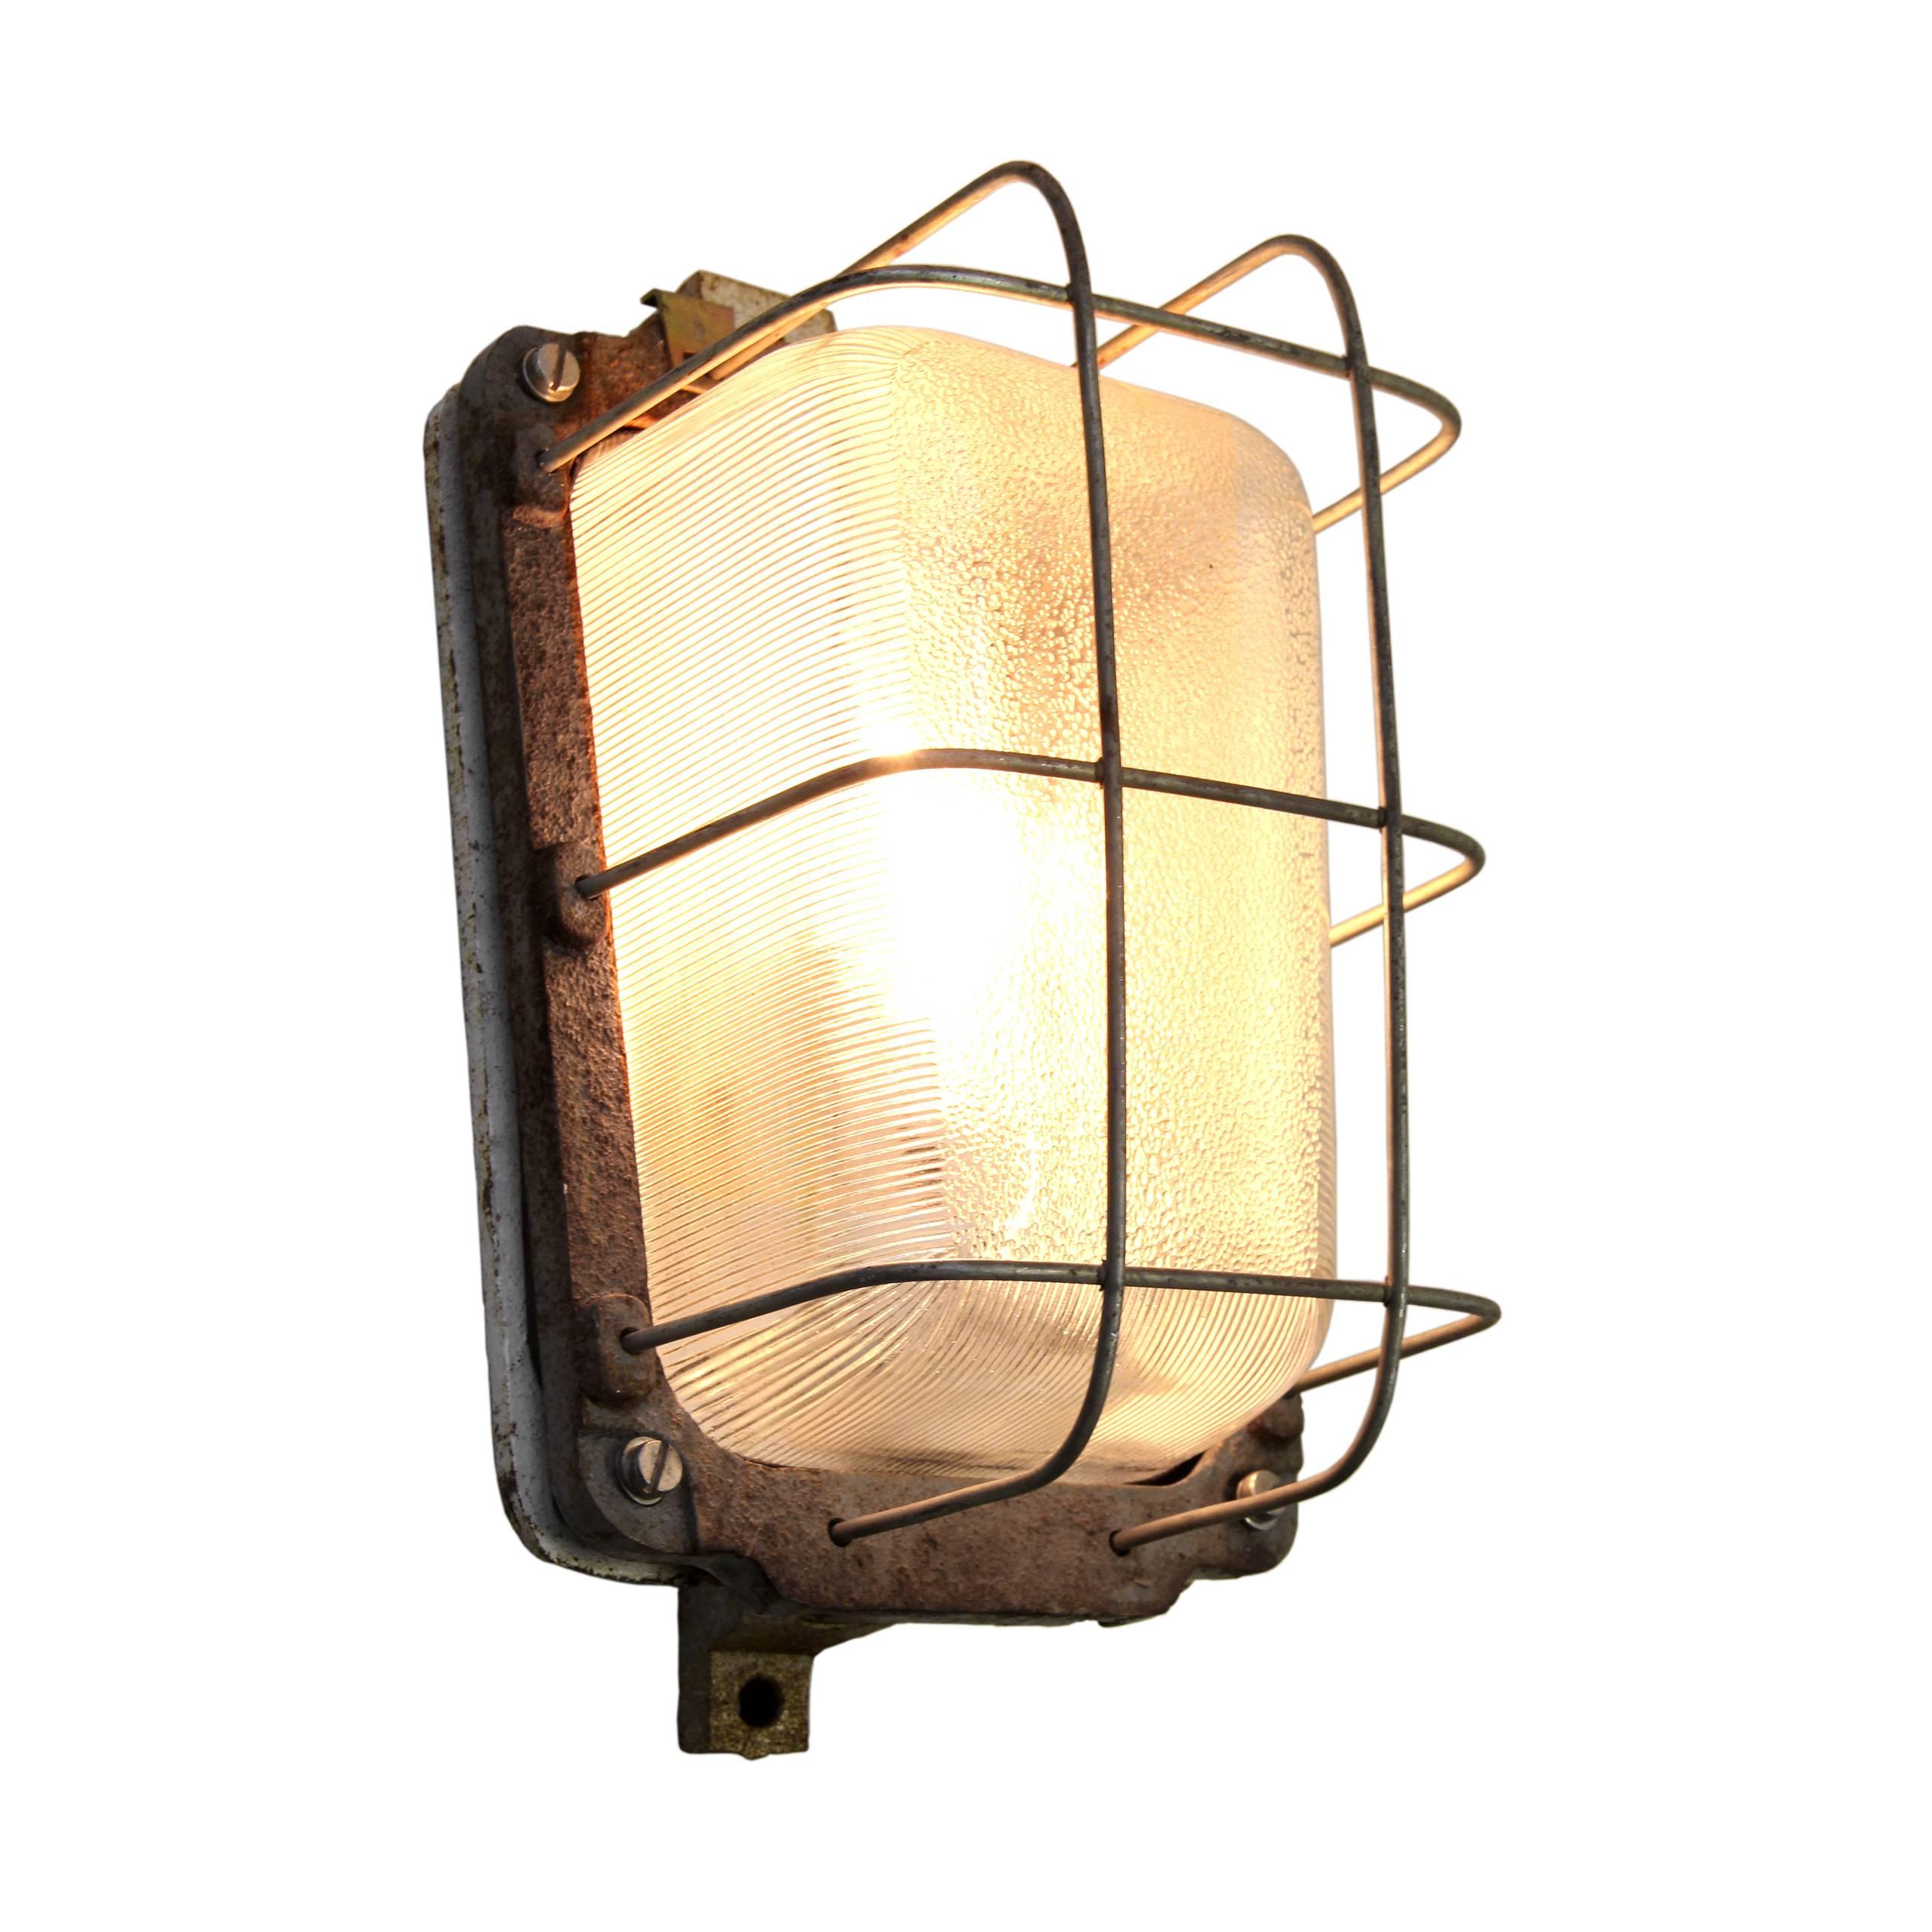 European Industrial wall or ceiling classic. Cast iron with Holophane glass. Also for use outdoors. 

Measure: Weight 5.0 kg / 11 lb.

All lamps have been made suitable by international standards for incandescent light bulbs, energy-efficient and